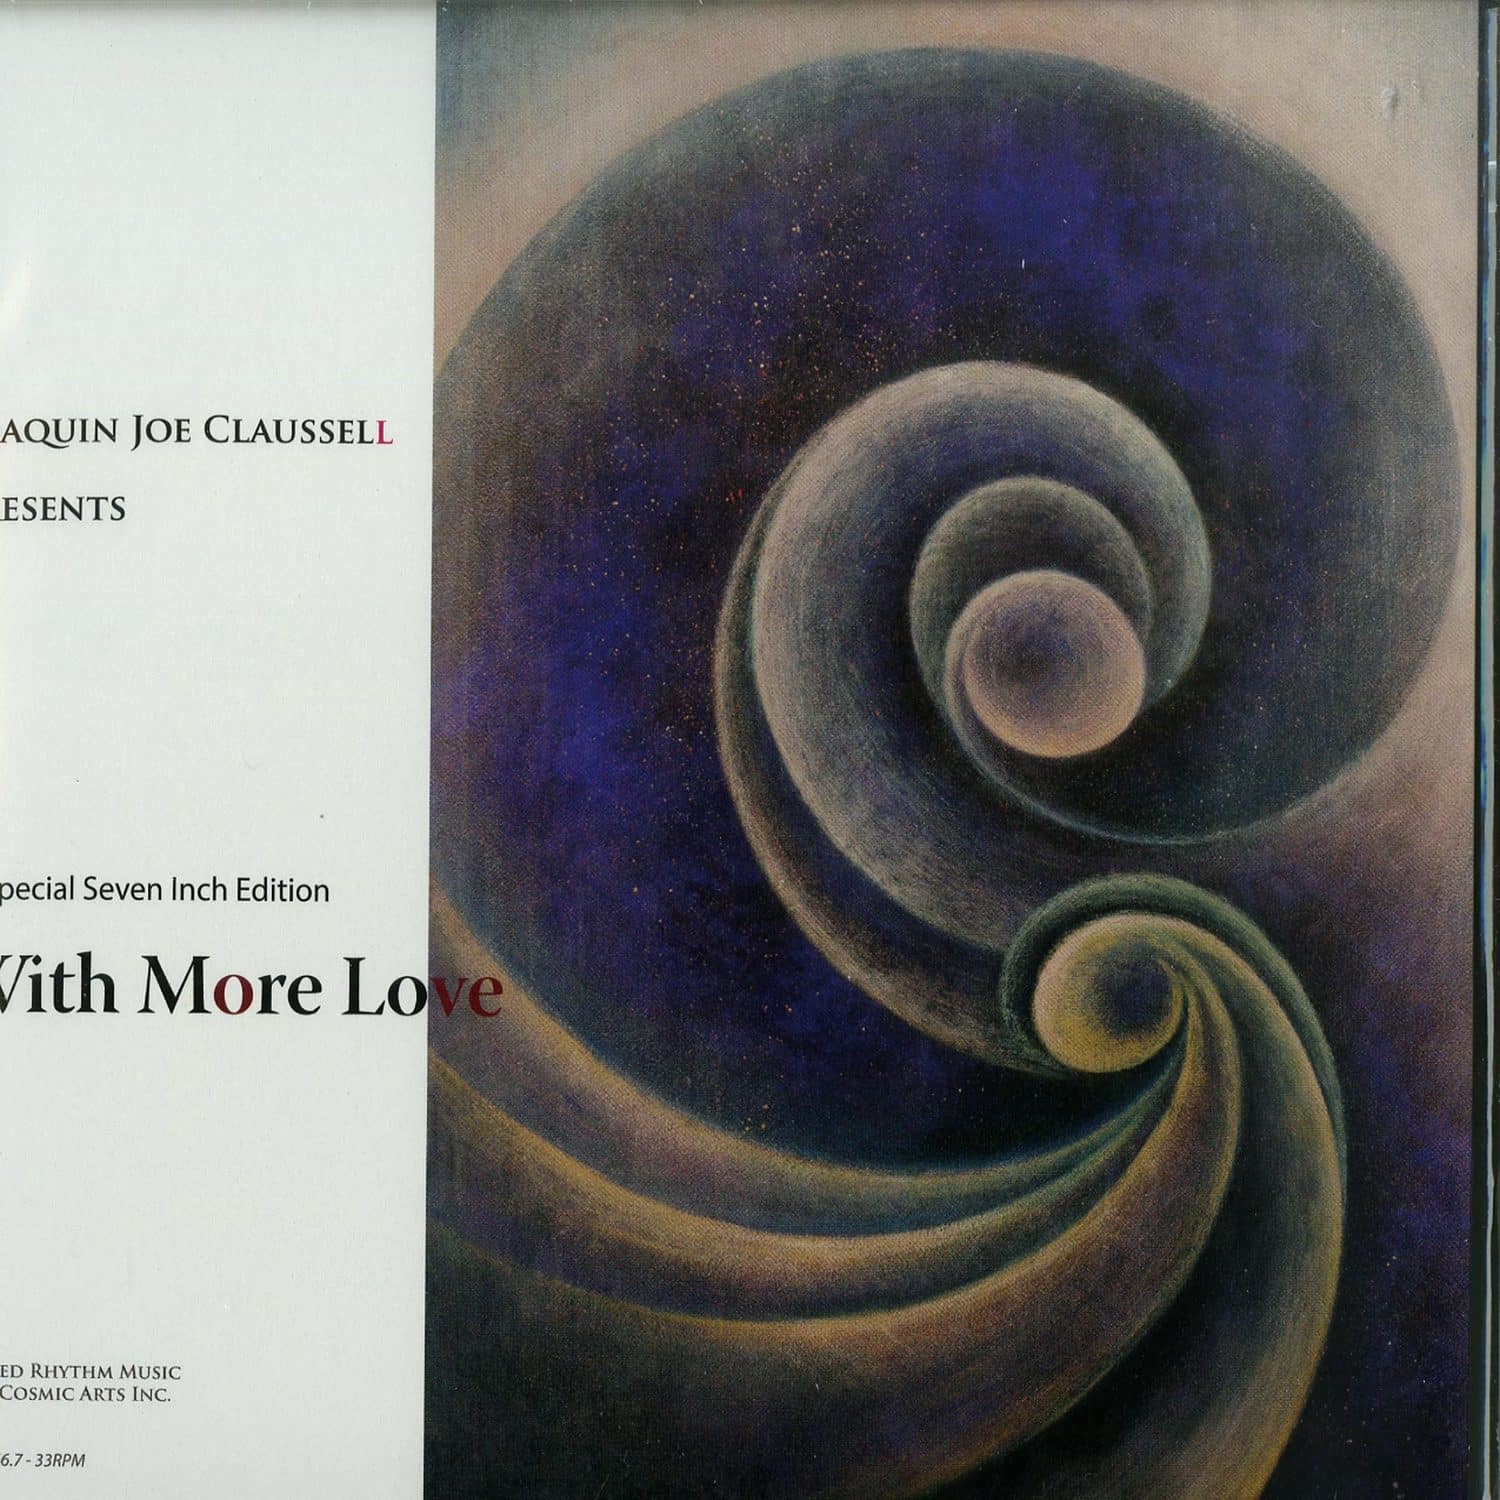 Joaquin Joe Claussell - WITH MORE LOVE - THE 7 INCH MIXES 